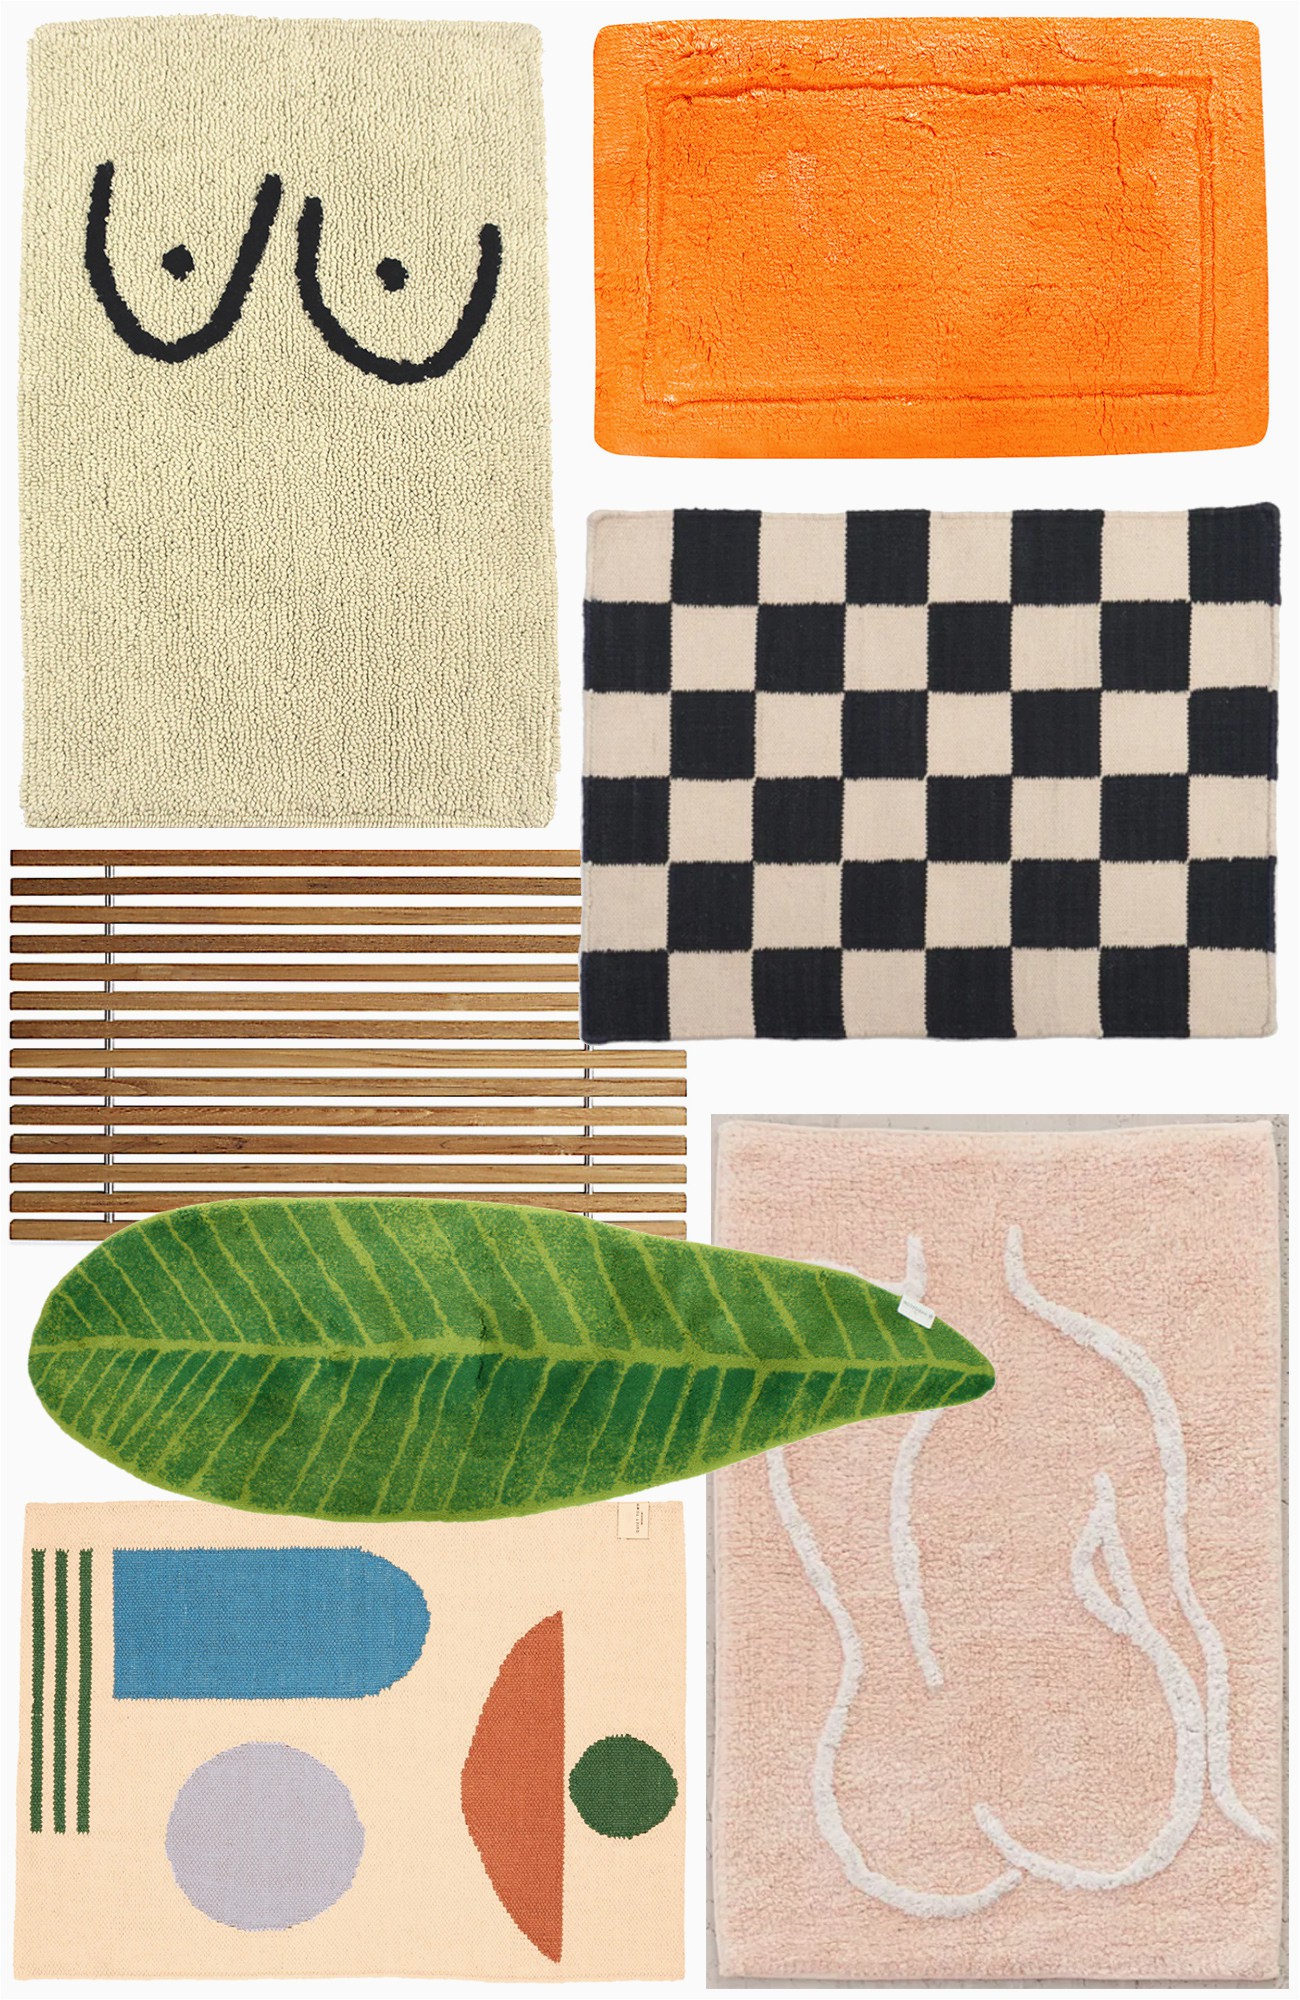 Bamboo Bath Mats Rugs the Best Bath Mats some Cool In Home Shops the Stripe